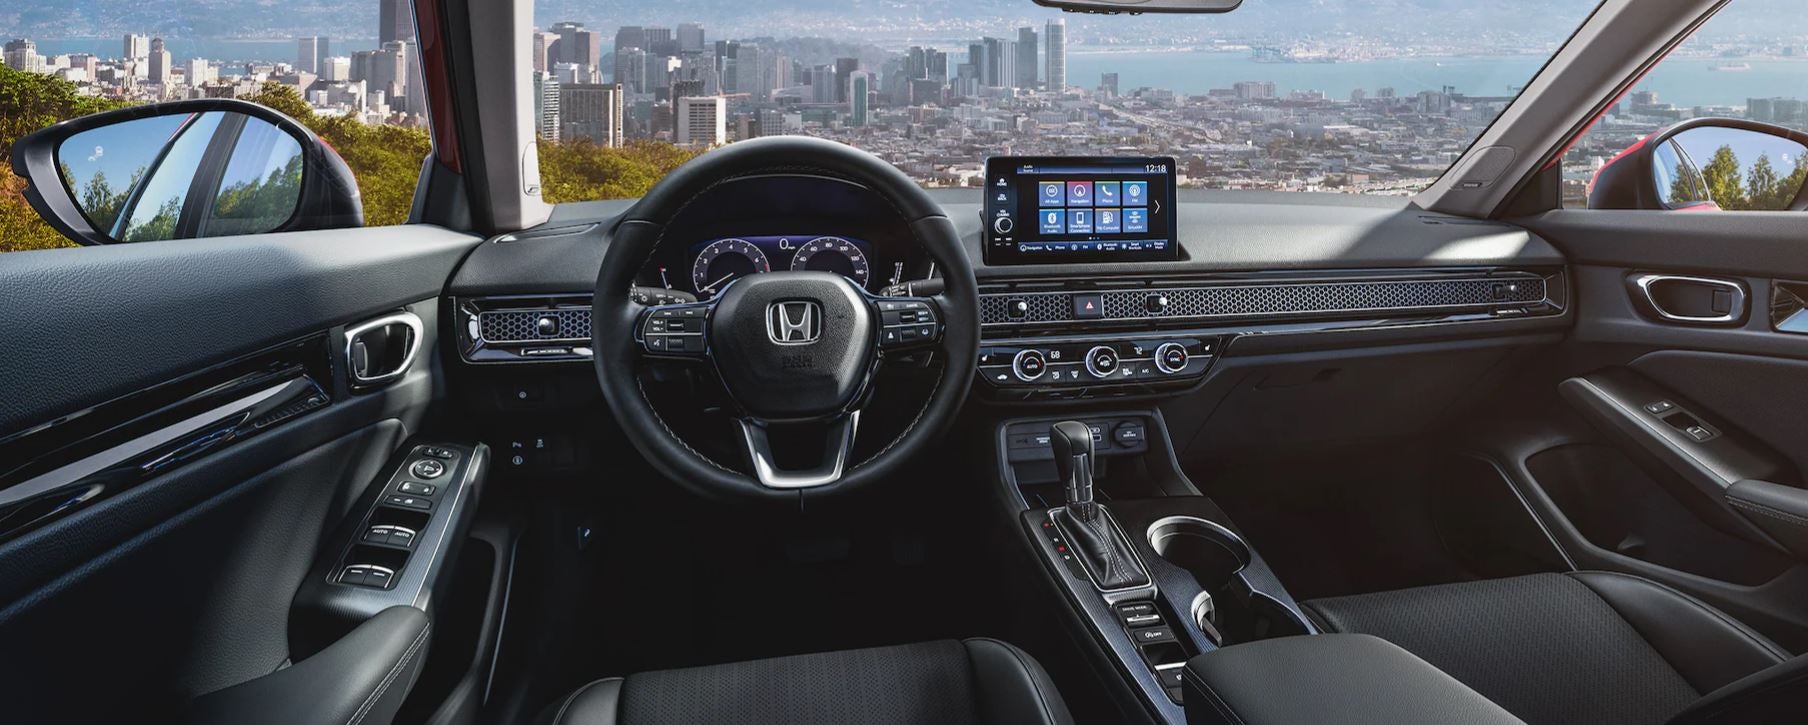 2022 Honda Civic entertainment system in Waldorf, MD